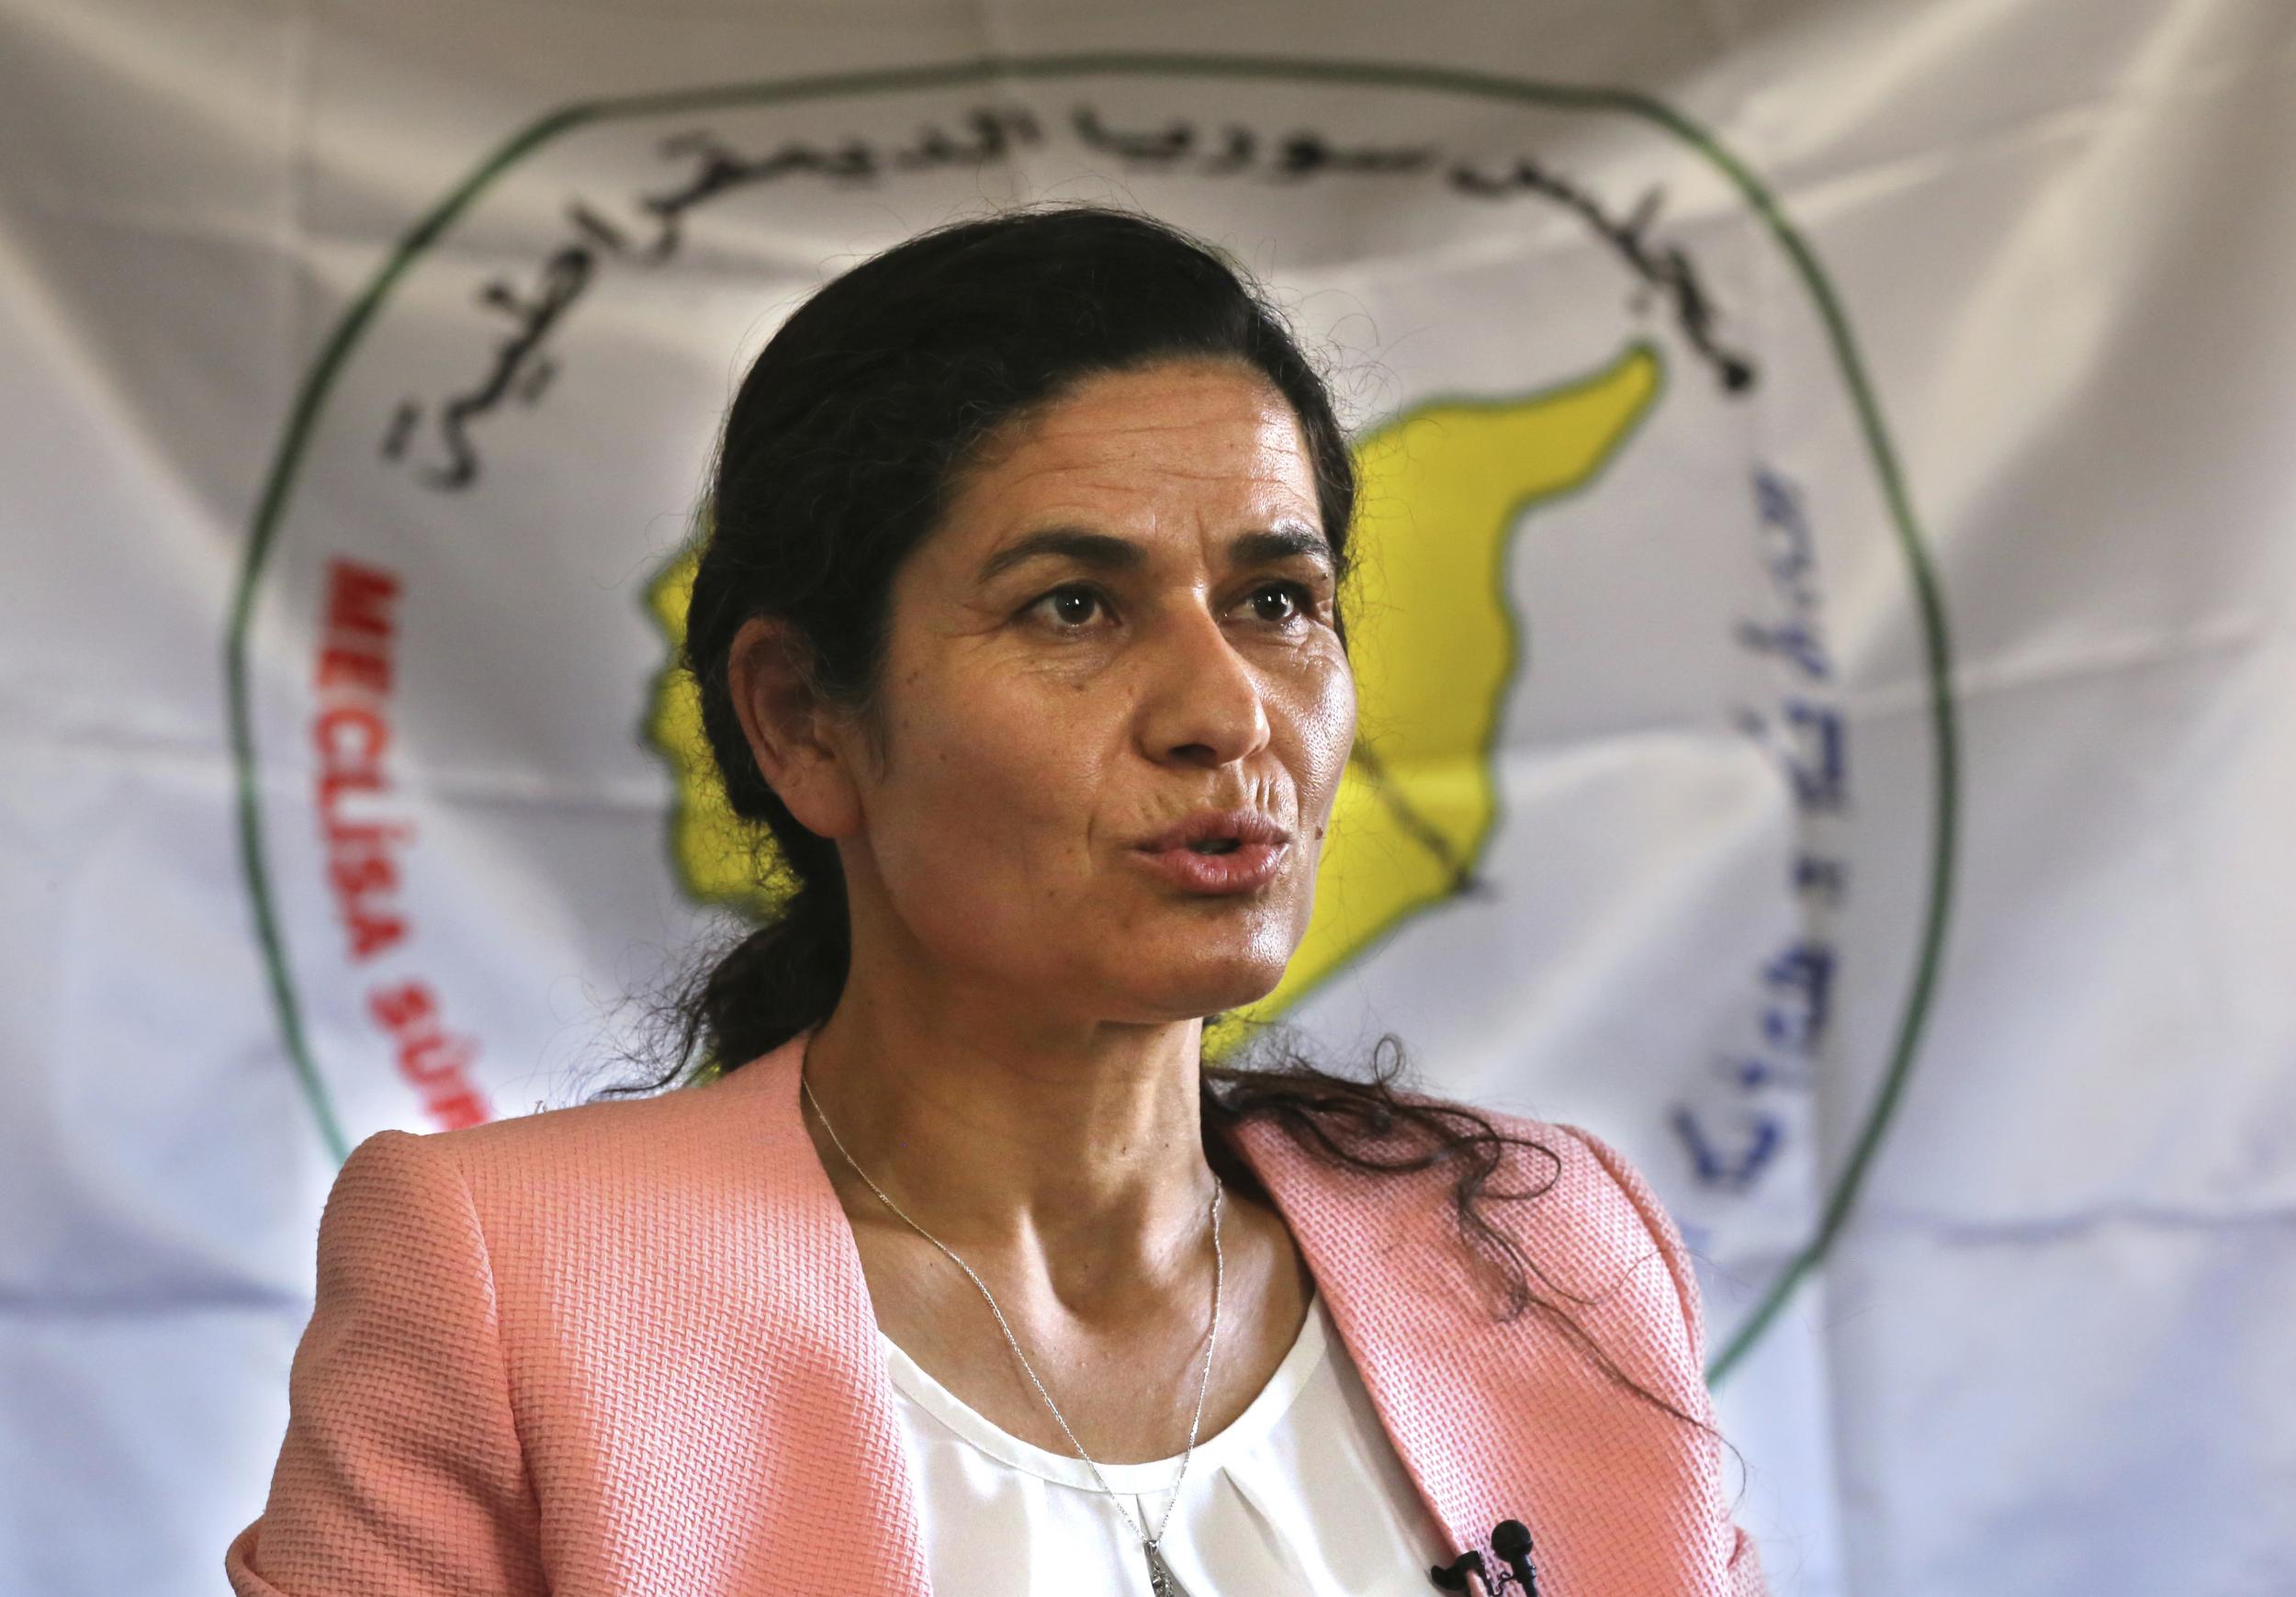 Ilham Ahmed has been lobbying the US to broker an agreement between her group and Turkey over how to manage northeastern Syria once American troops withdraw (AP)